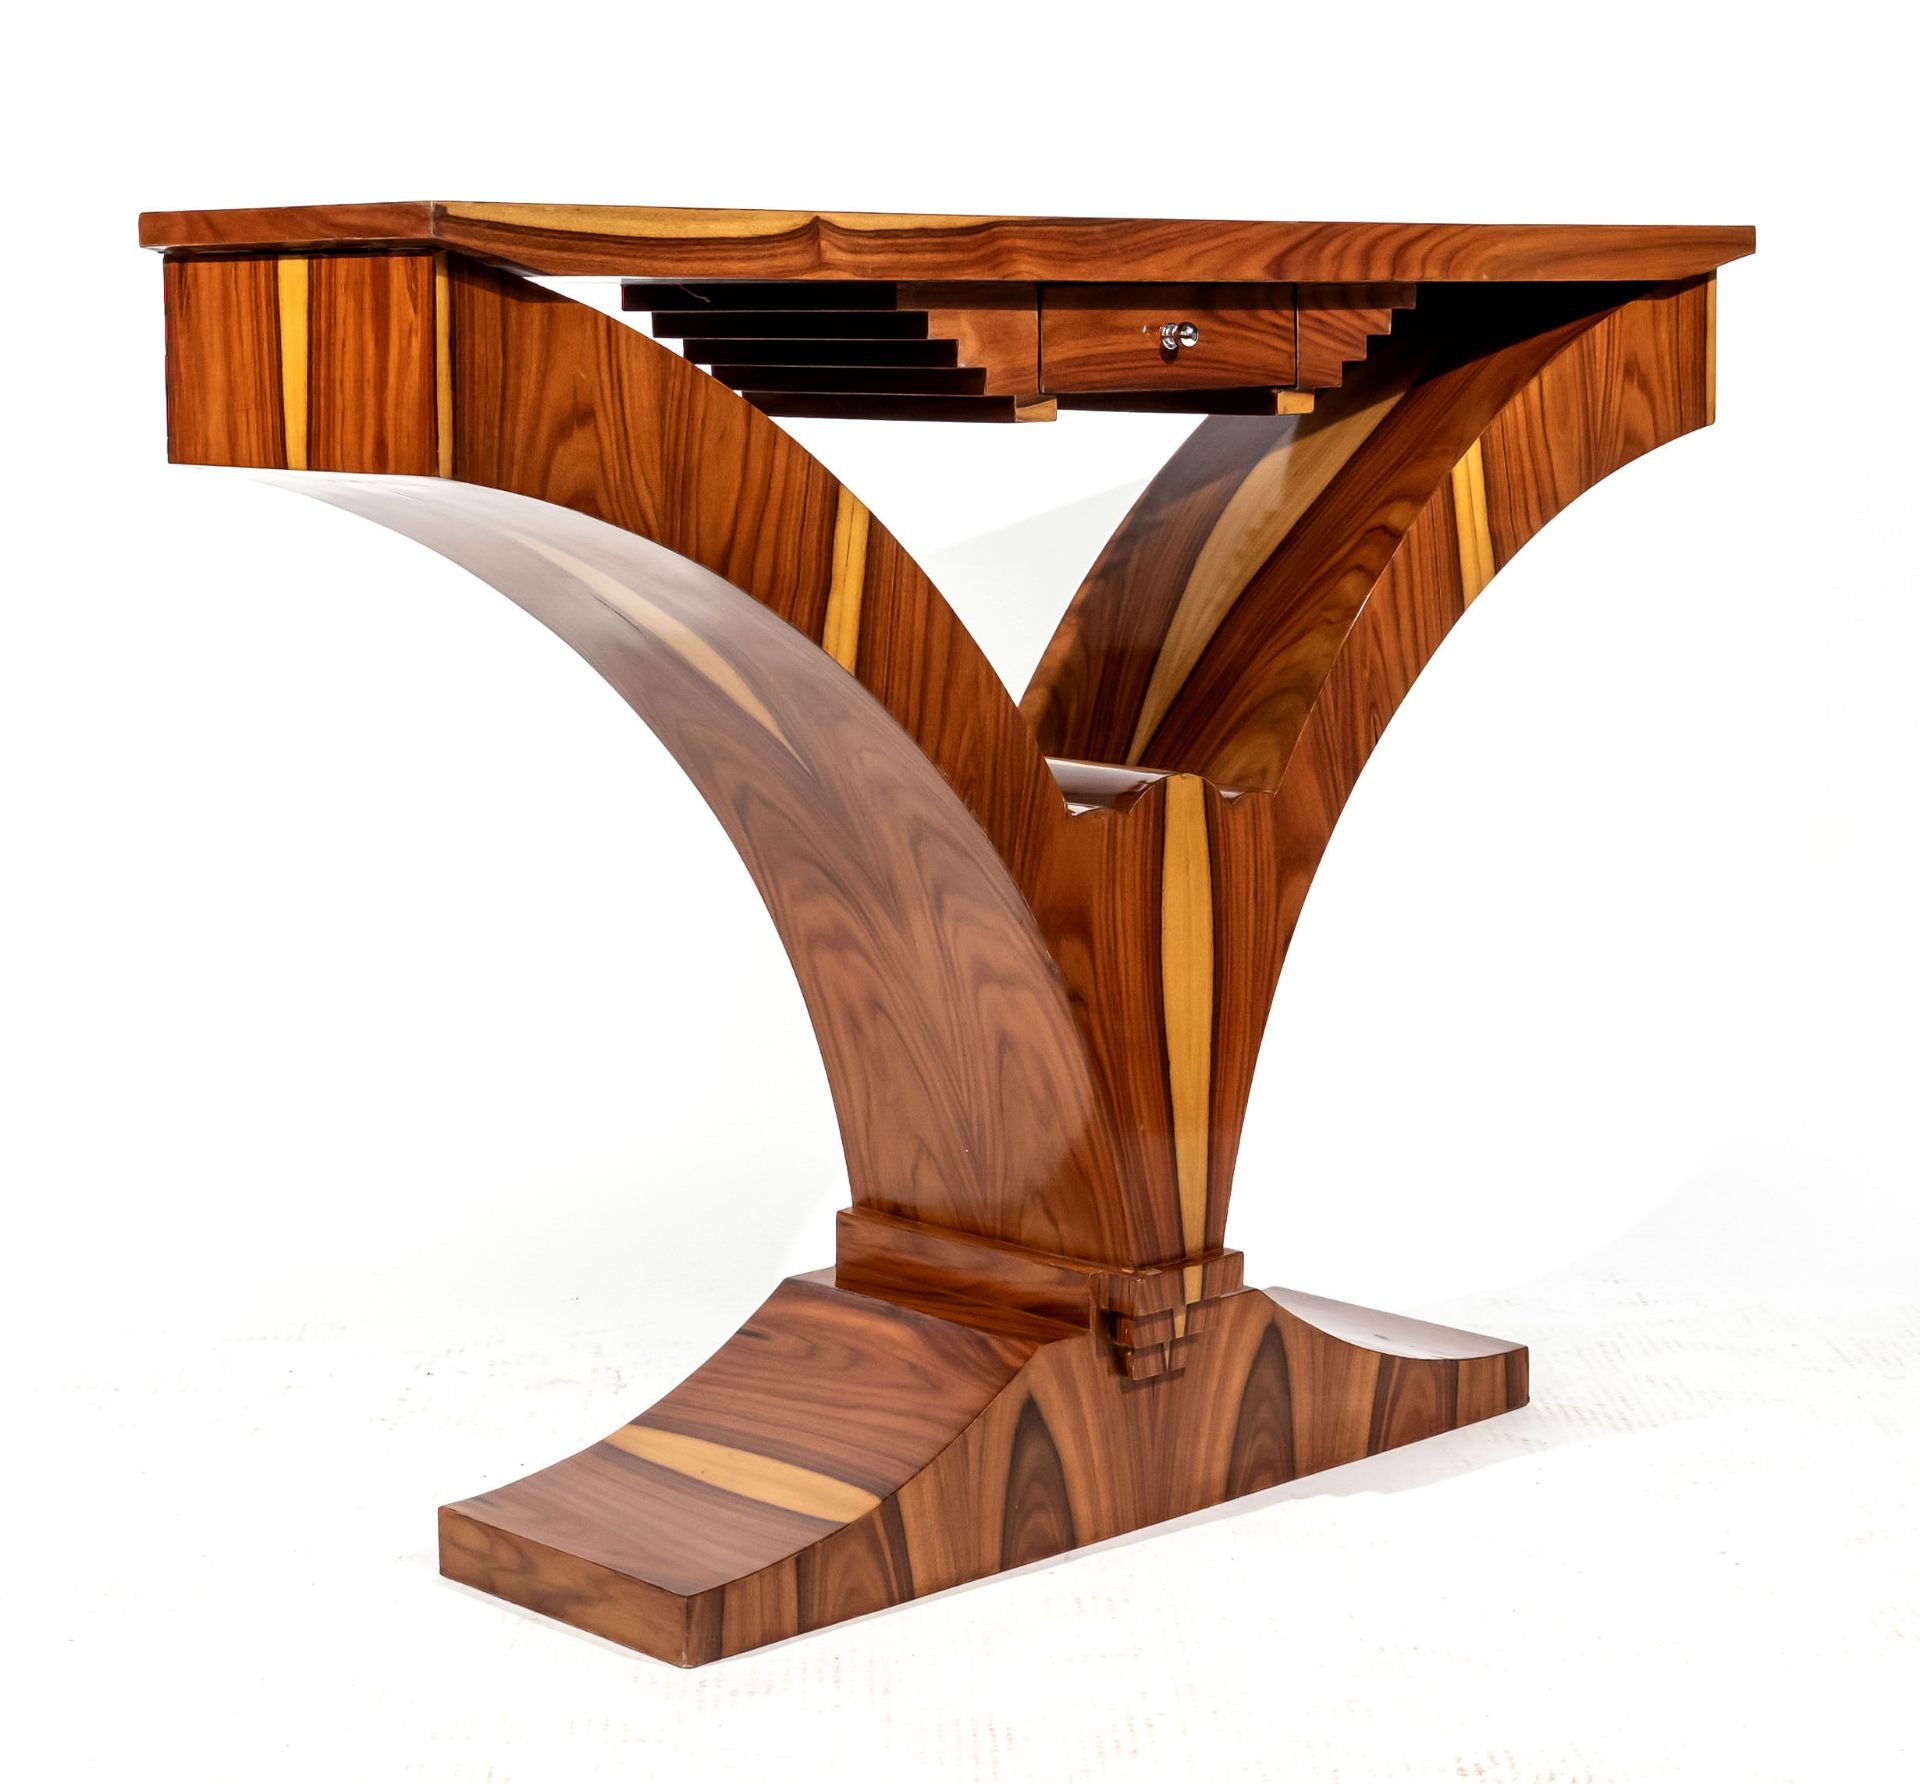 Console table in Art Deco style, late 20th century, mahogany and rosewood veneer, stepped frame with - Image 2 of 2